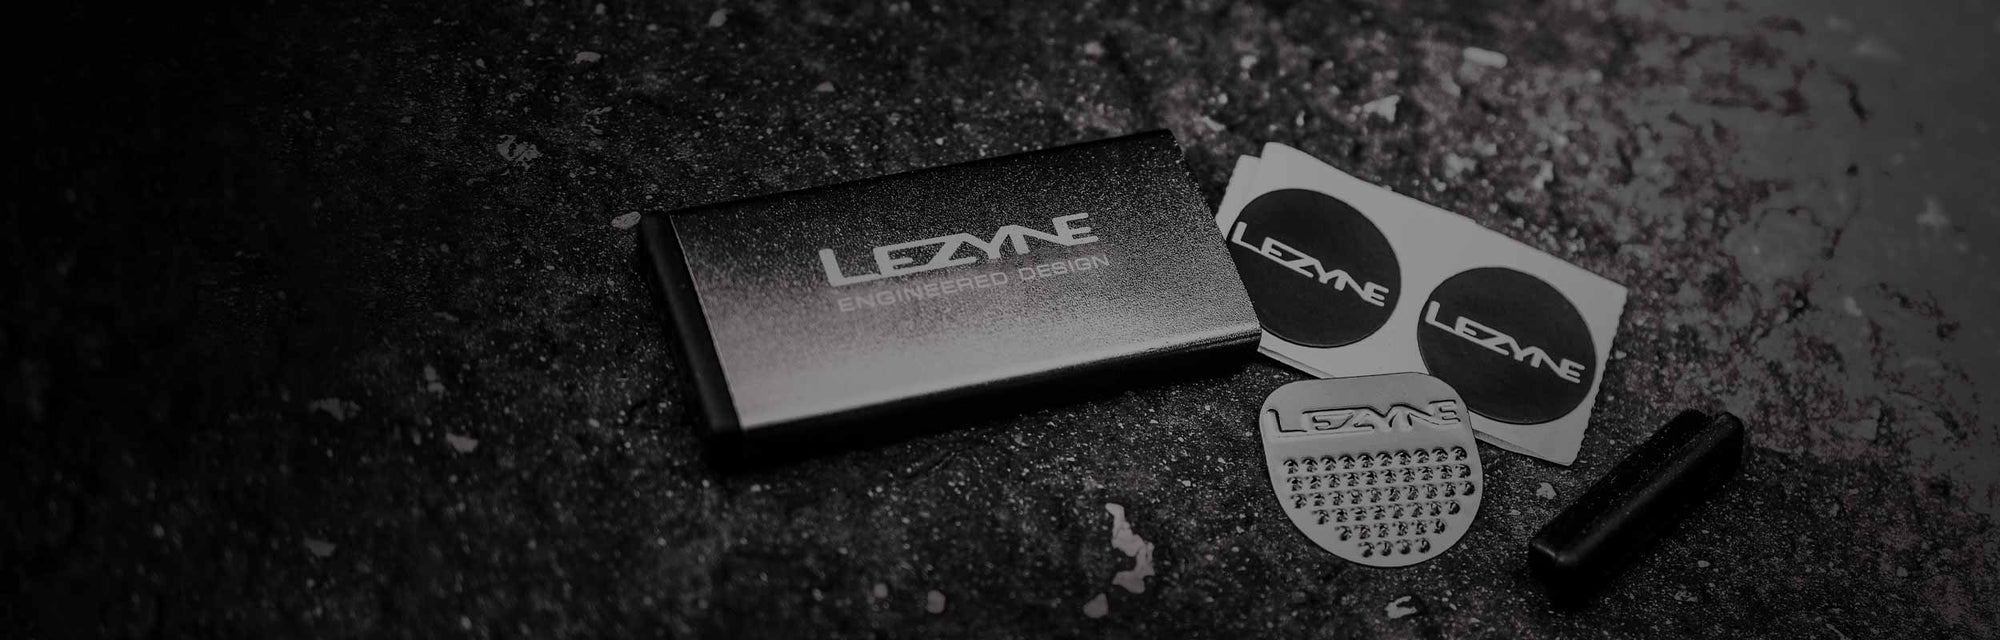 A patch kit with the word Lezyne printed on it.